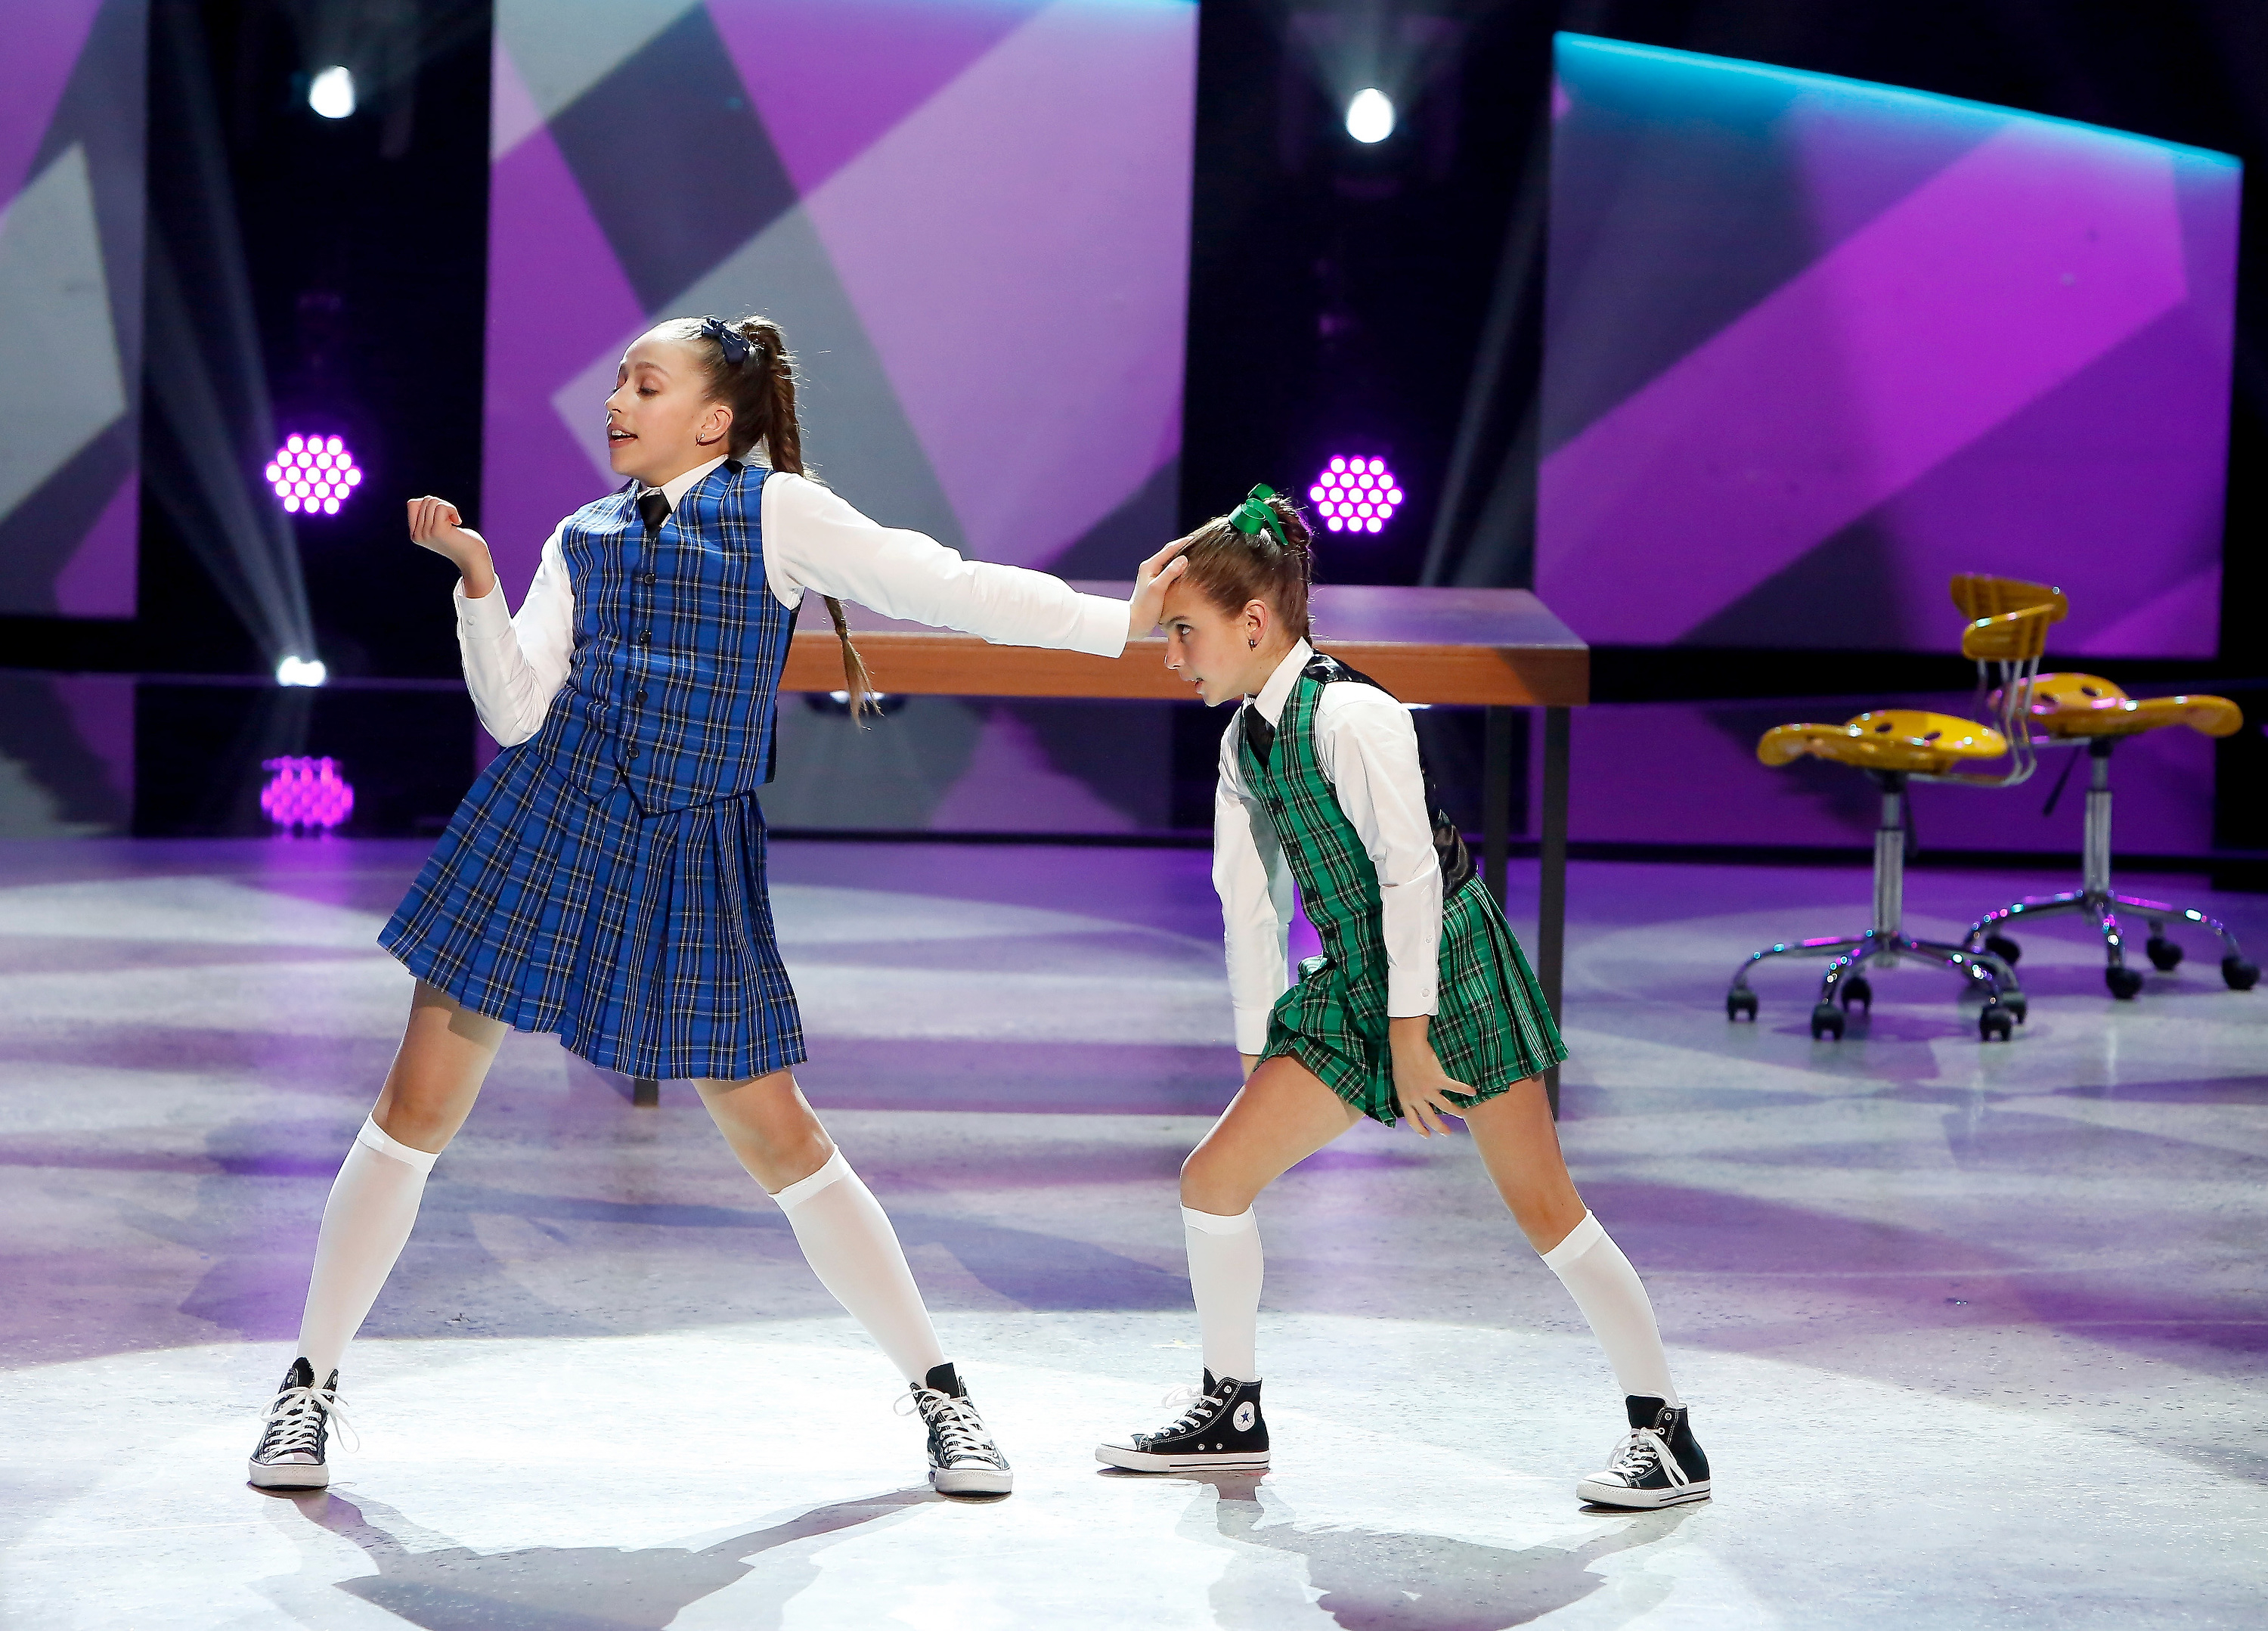 A young Tate McRae wears a school girl outfit and converse sneakers, dancing alongside another young girl in a matching outfit.